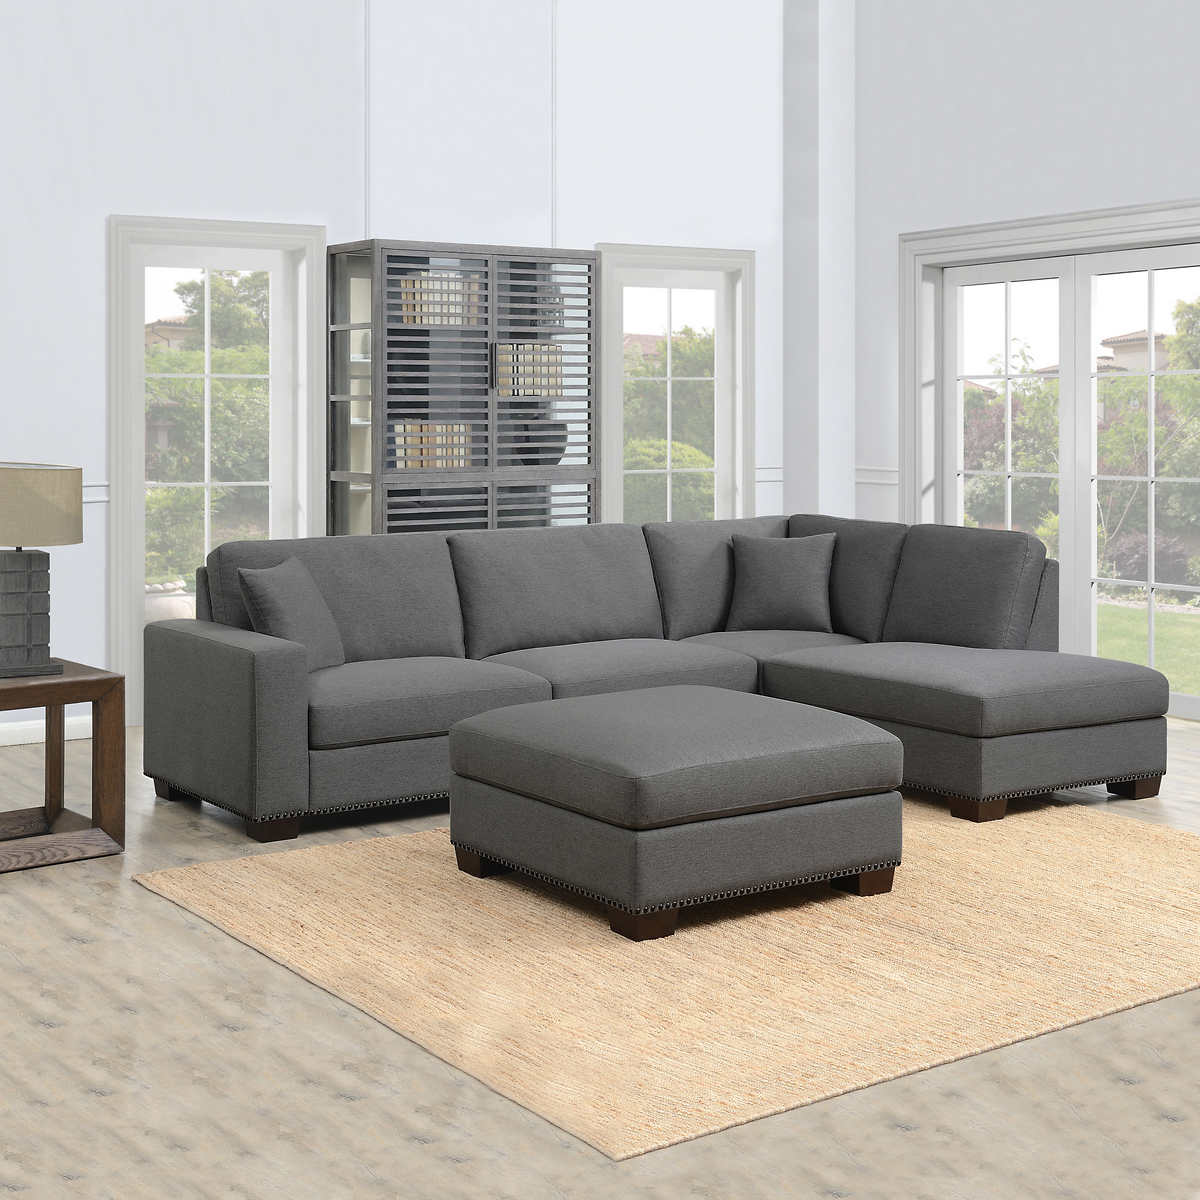 Thomasville Artesia 3 Piece Fabric Sectional With Ottoman